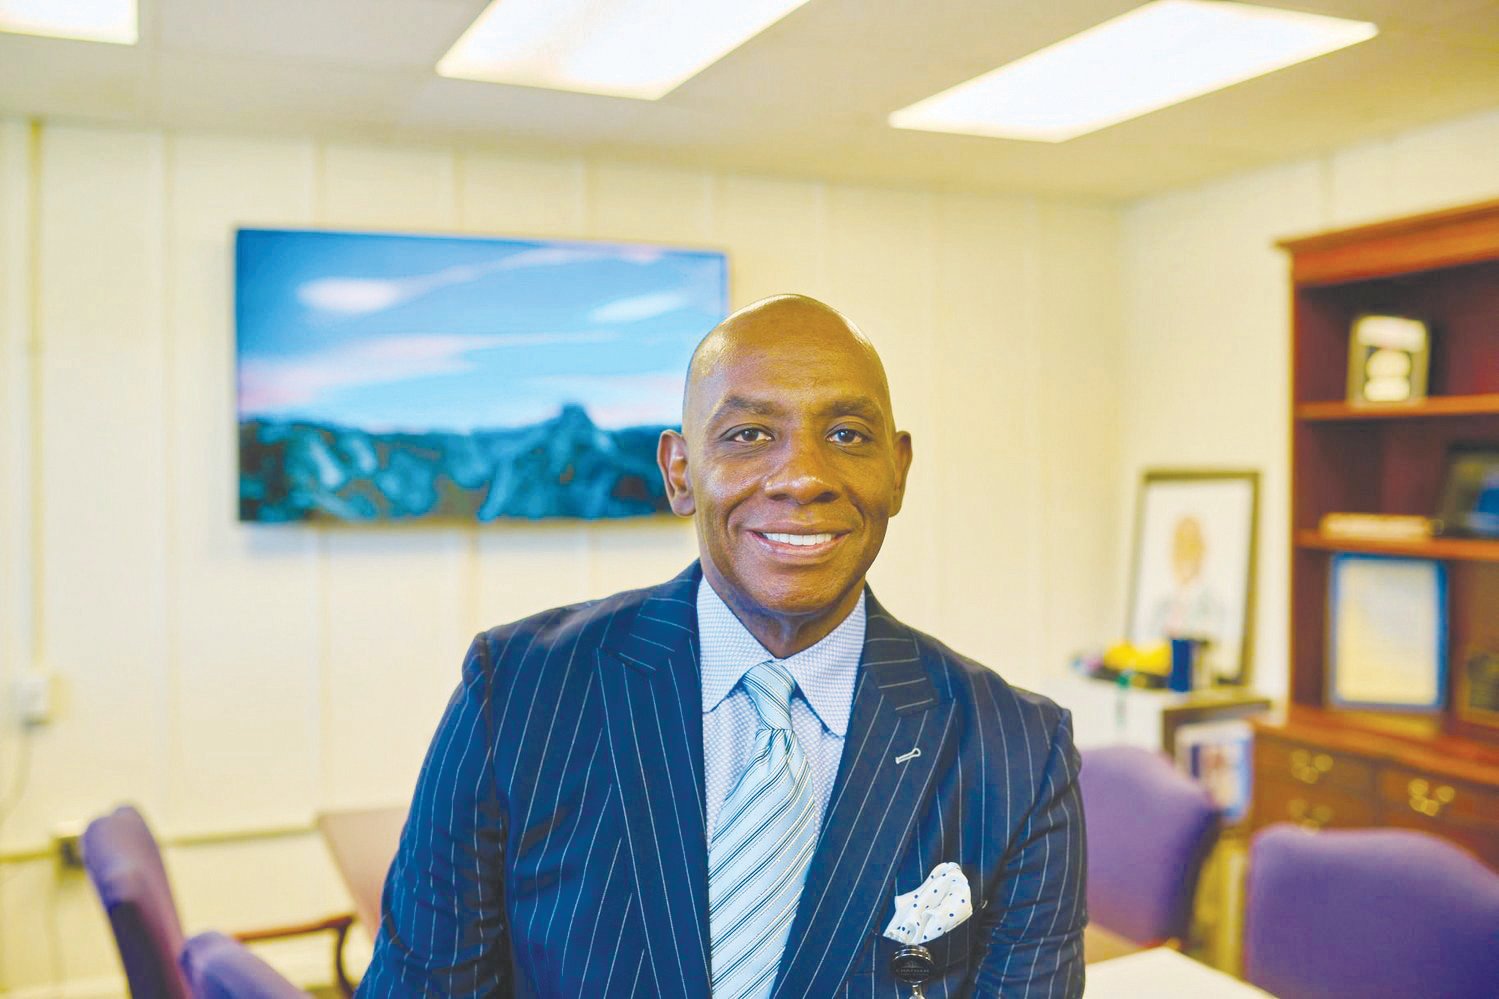 Chatham County Schools Superintendent Dr. Anthony Jackson spoke with the Chatham News + Record about the upcoming school year.